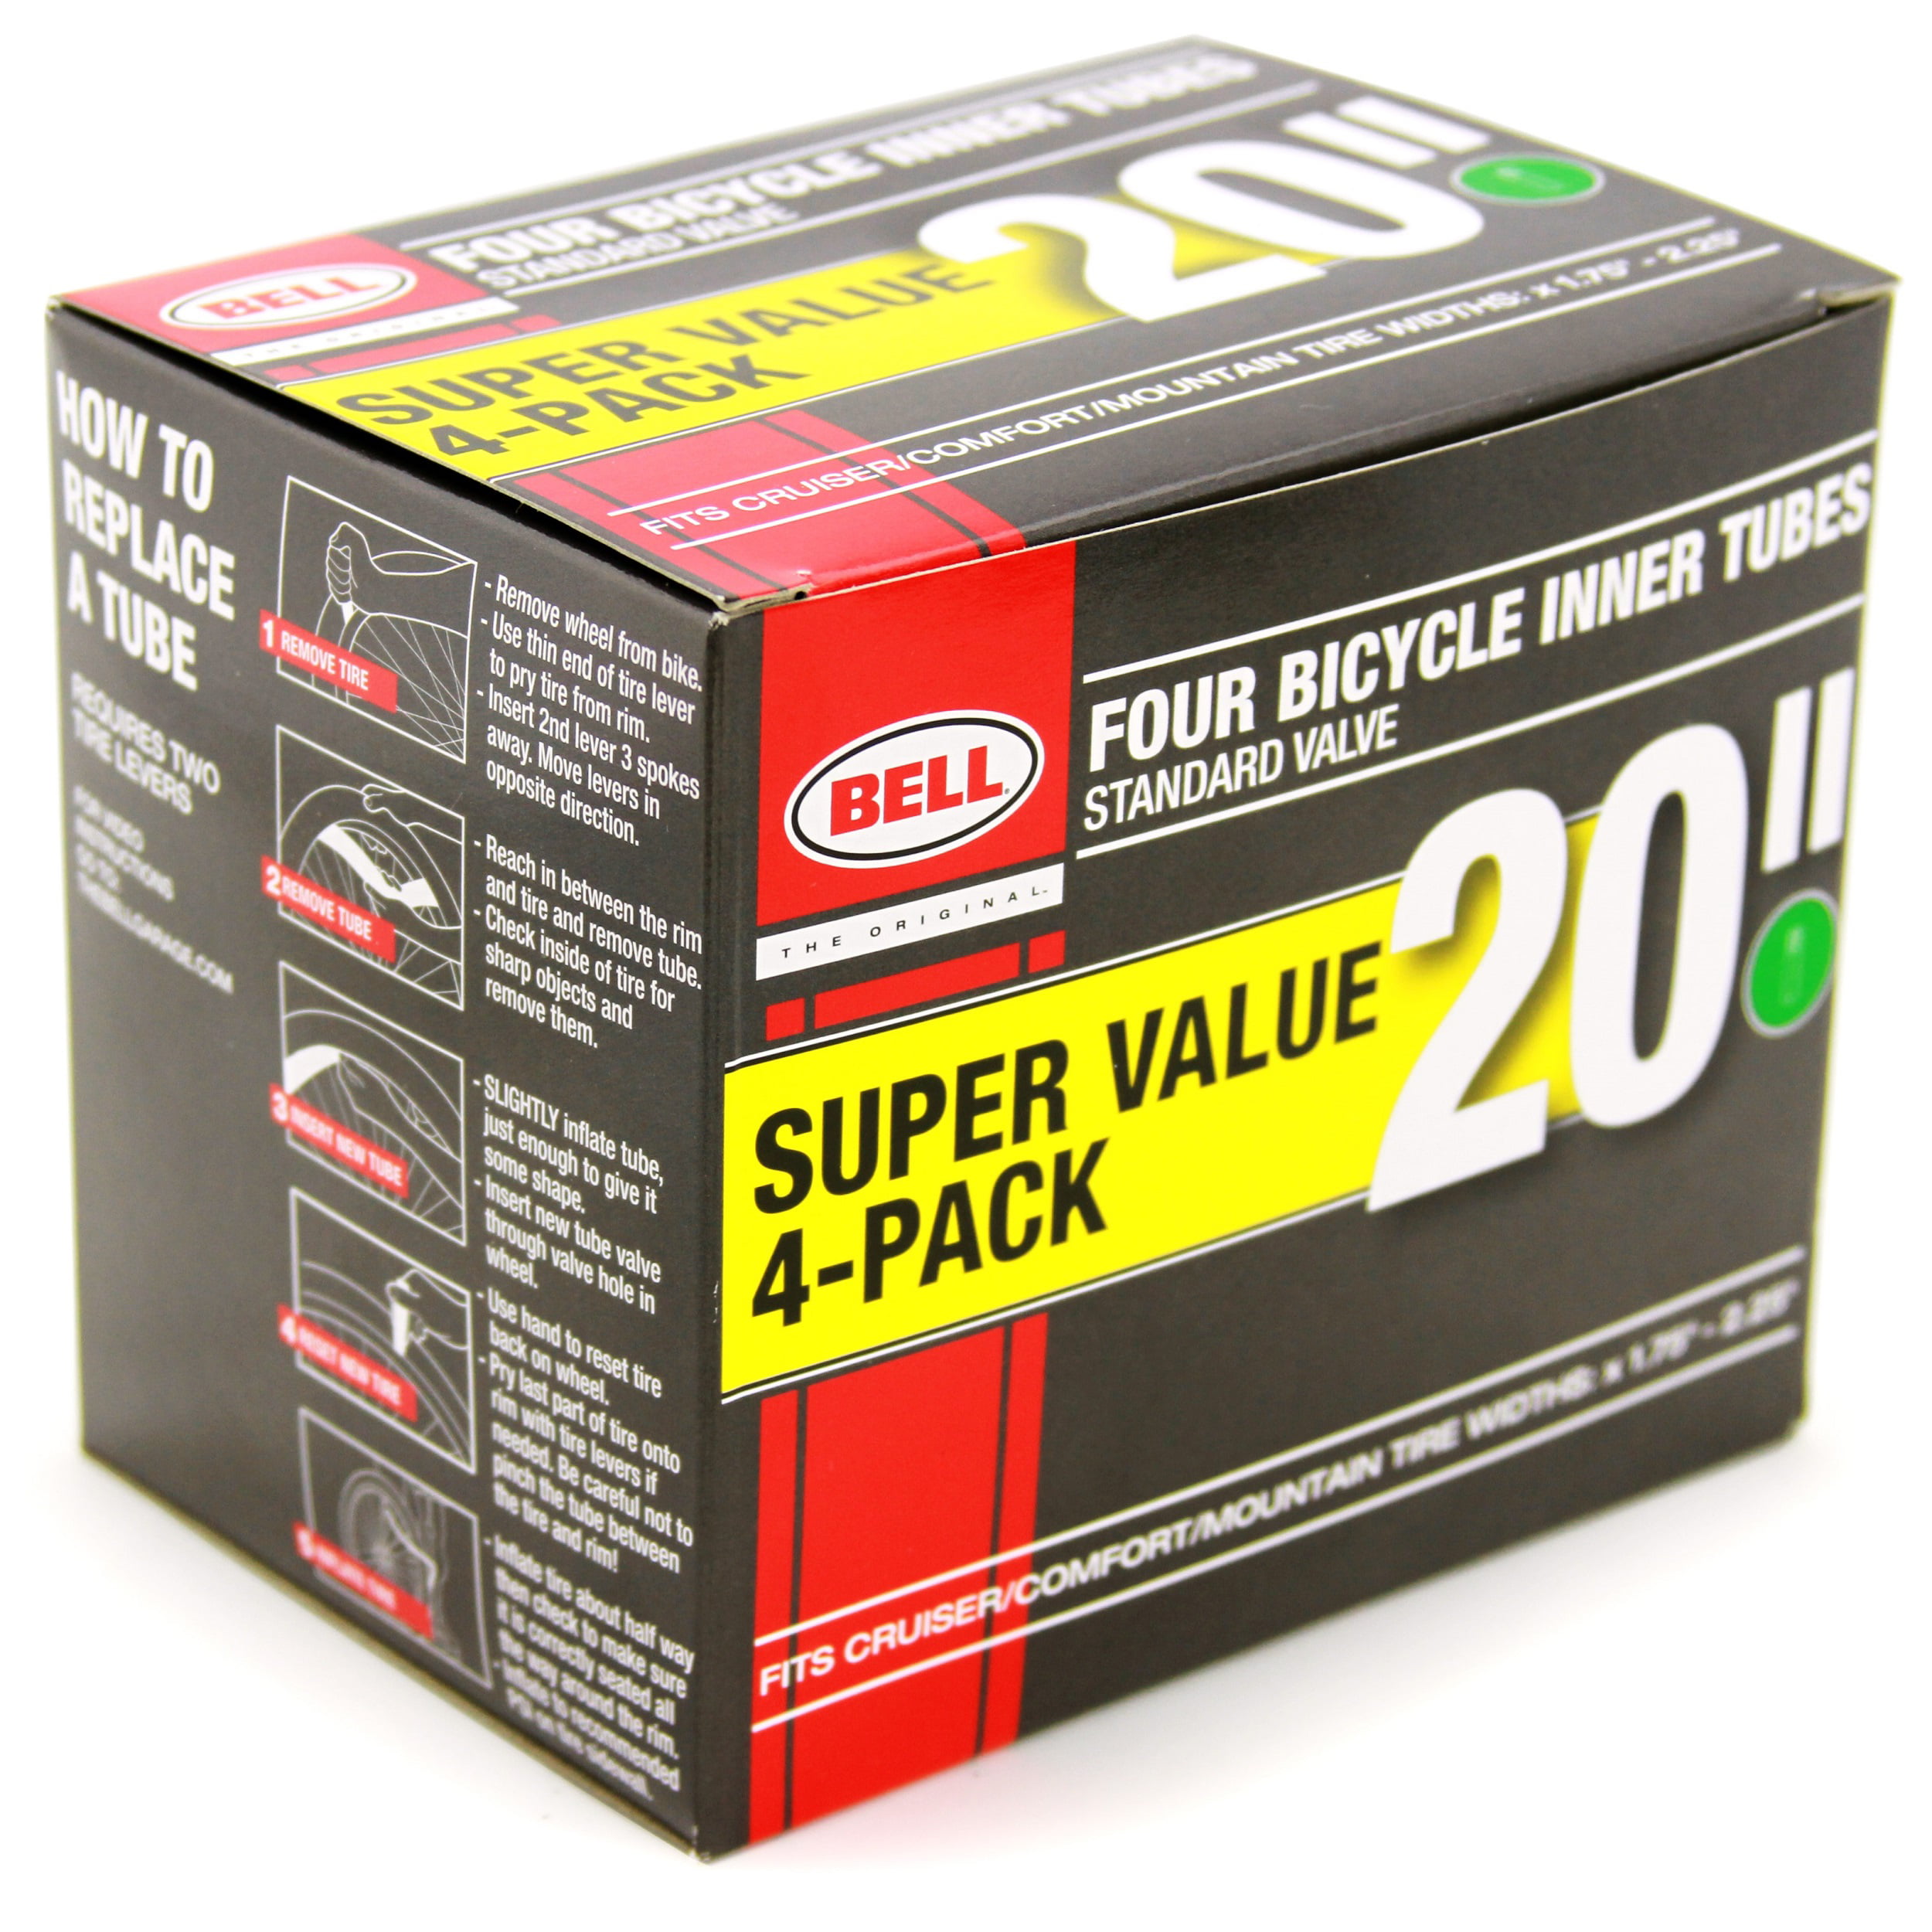 Details about   Bell 20” Bicycle Inner Tubes 4-Pack Standard Value Widths 1.75" 2.25" New 